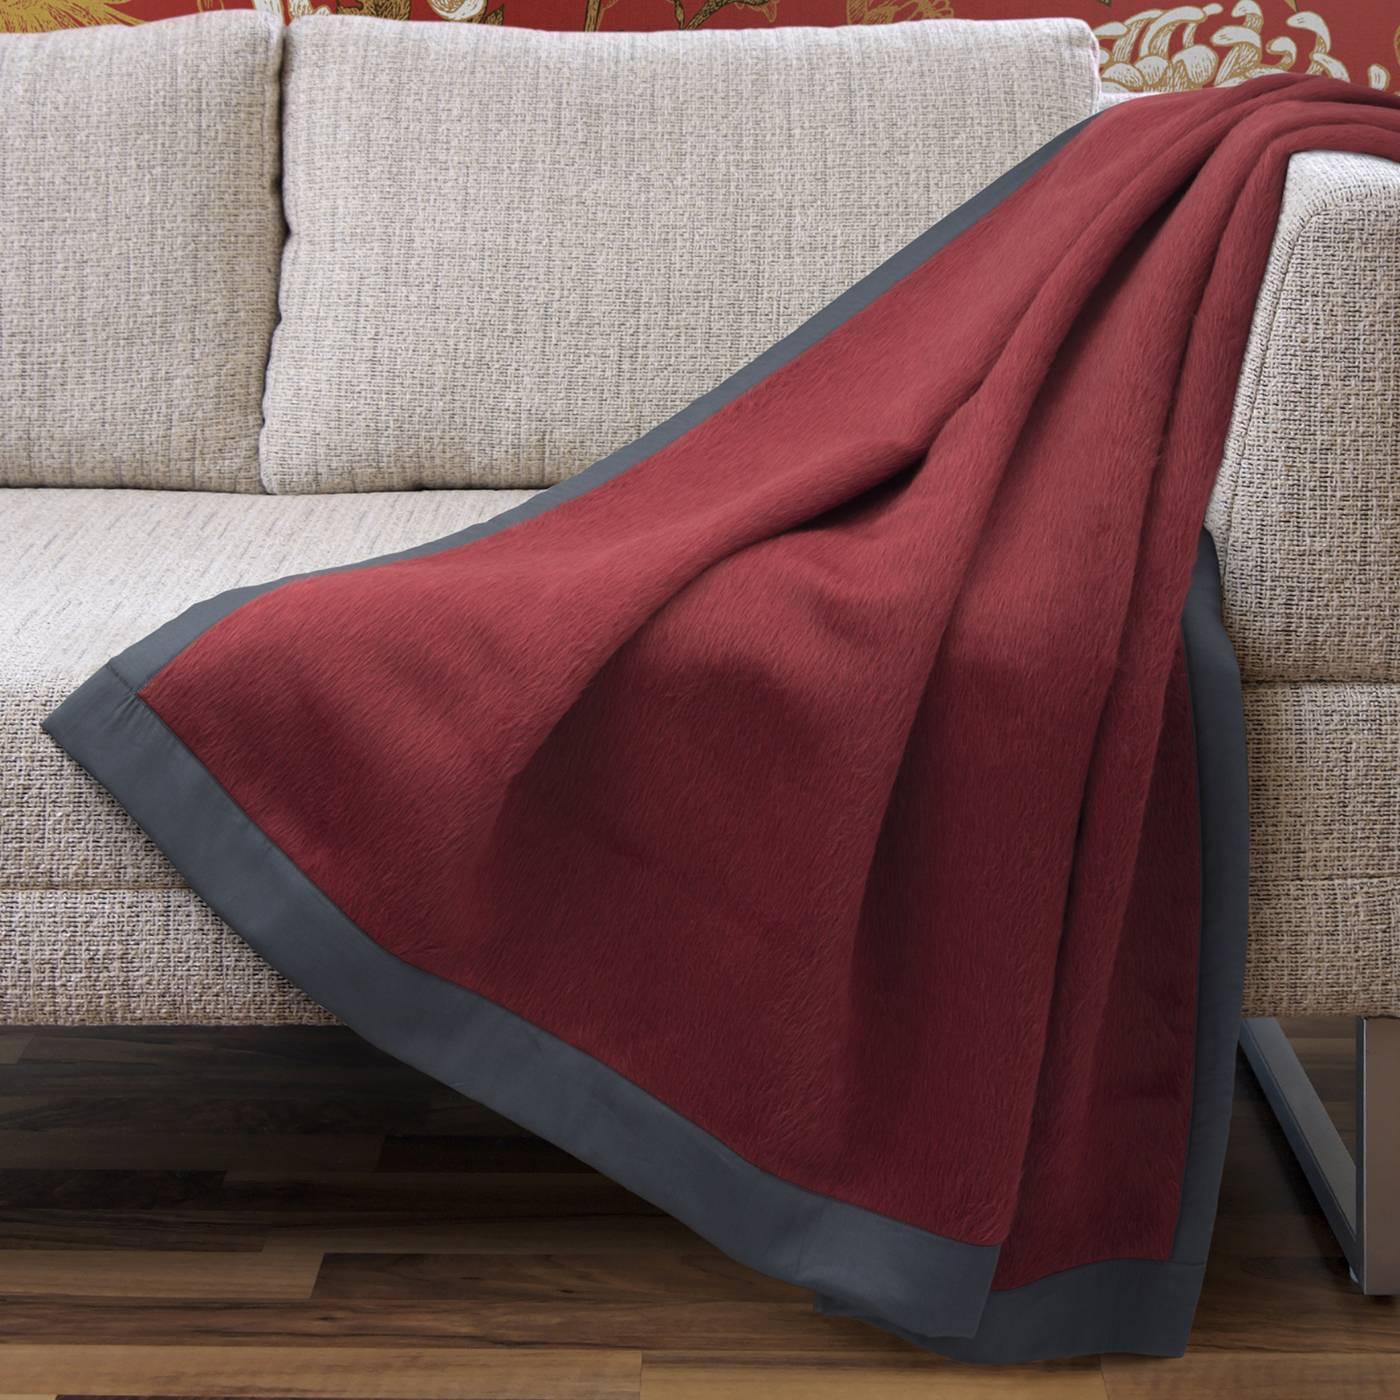 This luxurious, alpaca-and-silk blanket will ensure a stylish and comfortable layer for any chilly night. Made of 70% alpaca and 30% virgin wool, the perfect balance between sumptuous softness and lightweight warmth, this blanket is completed with a